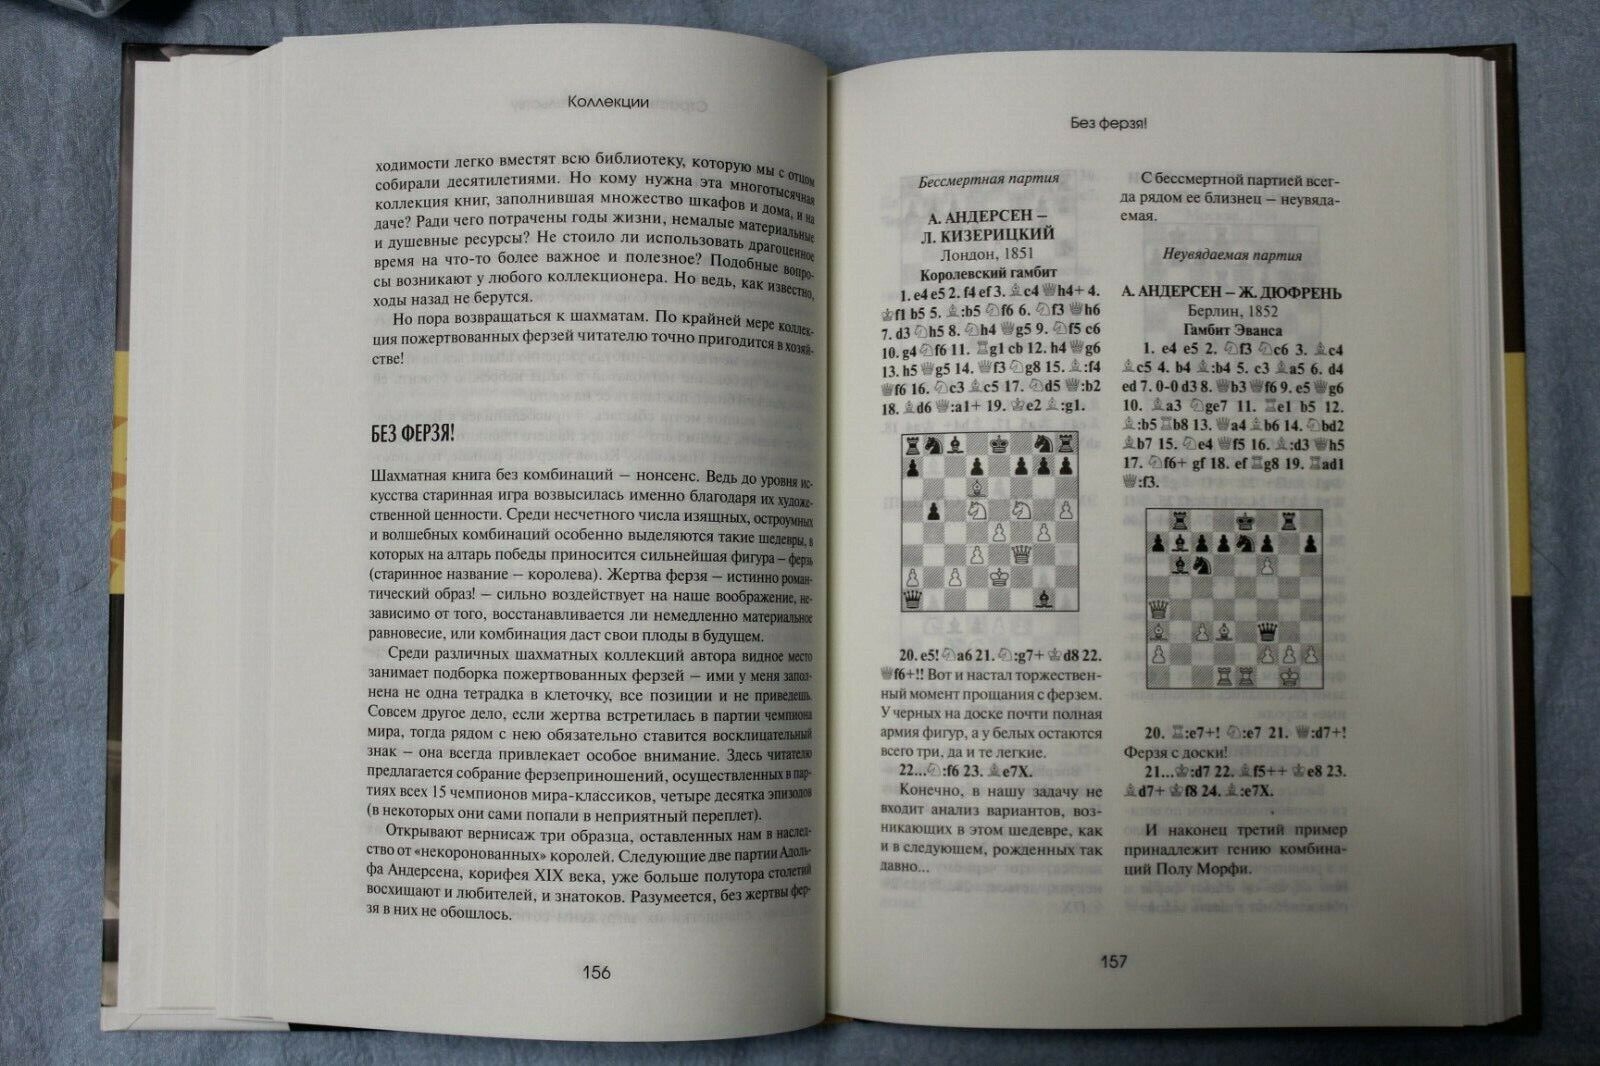 11121.Chess book: signed Gik for Rimma Bilunova, People and Figures w photoes, 2013